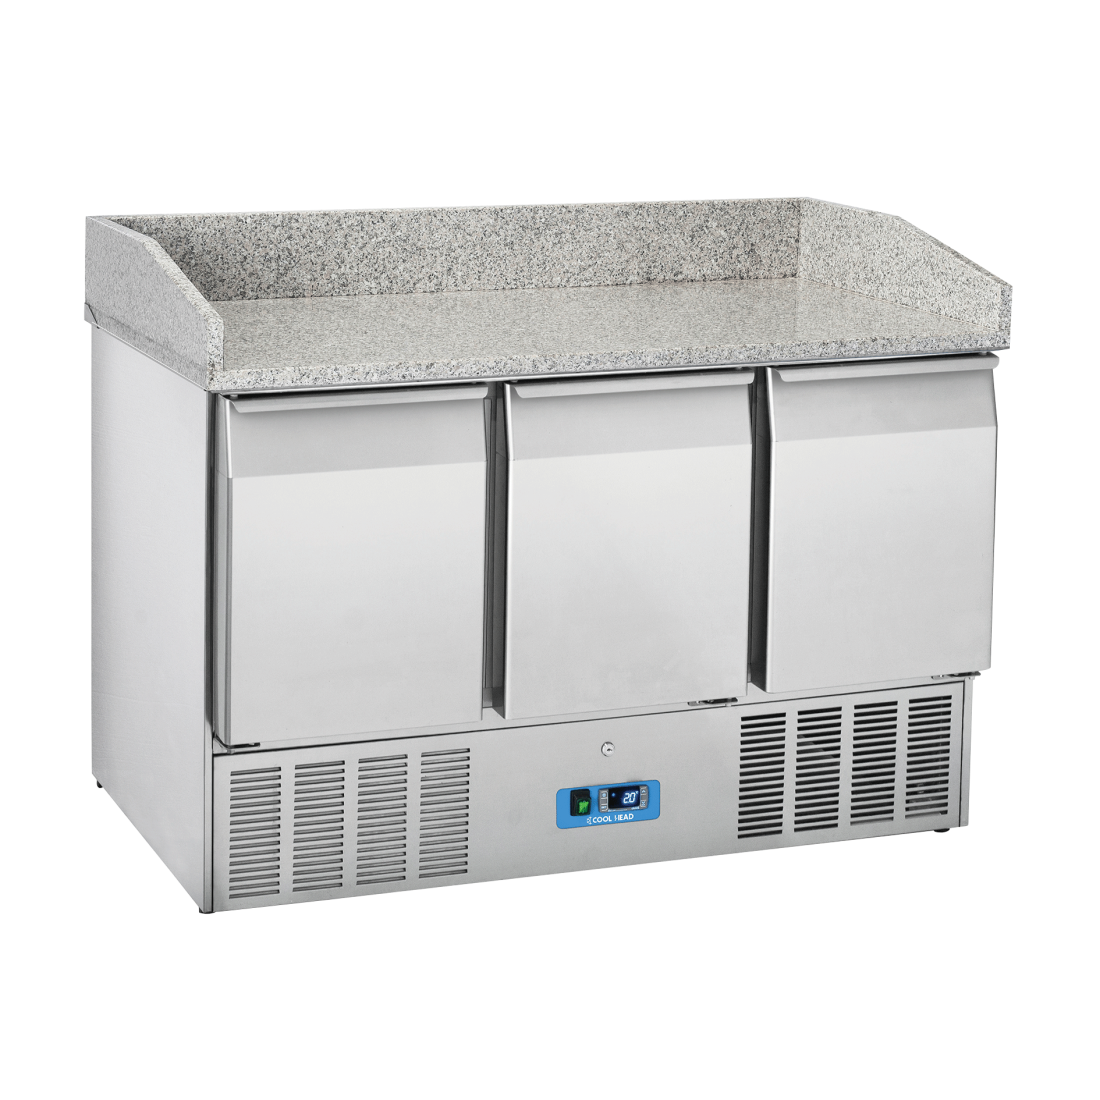 COOL HEAD ,CRM 93A, Sandwiches Preparation Chiller With Three Doors And Granite Worktop